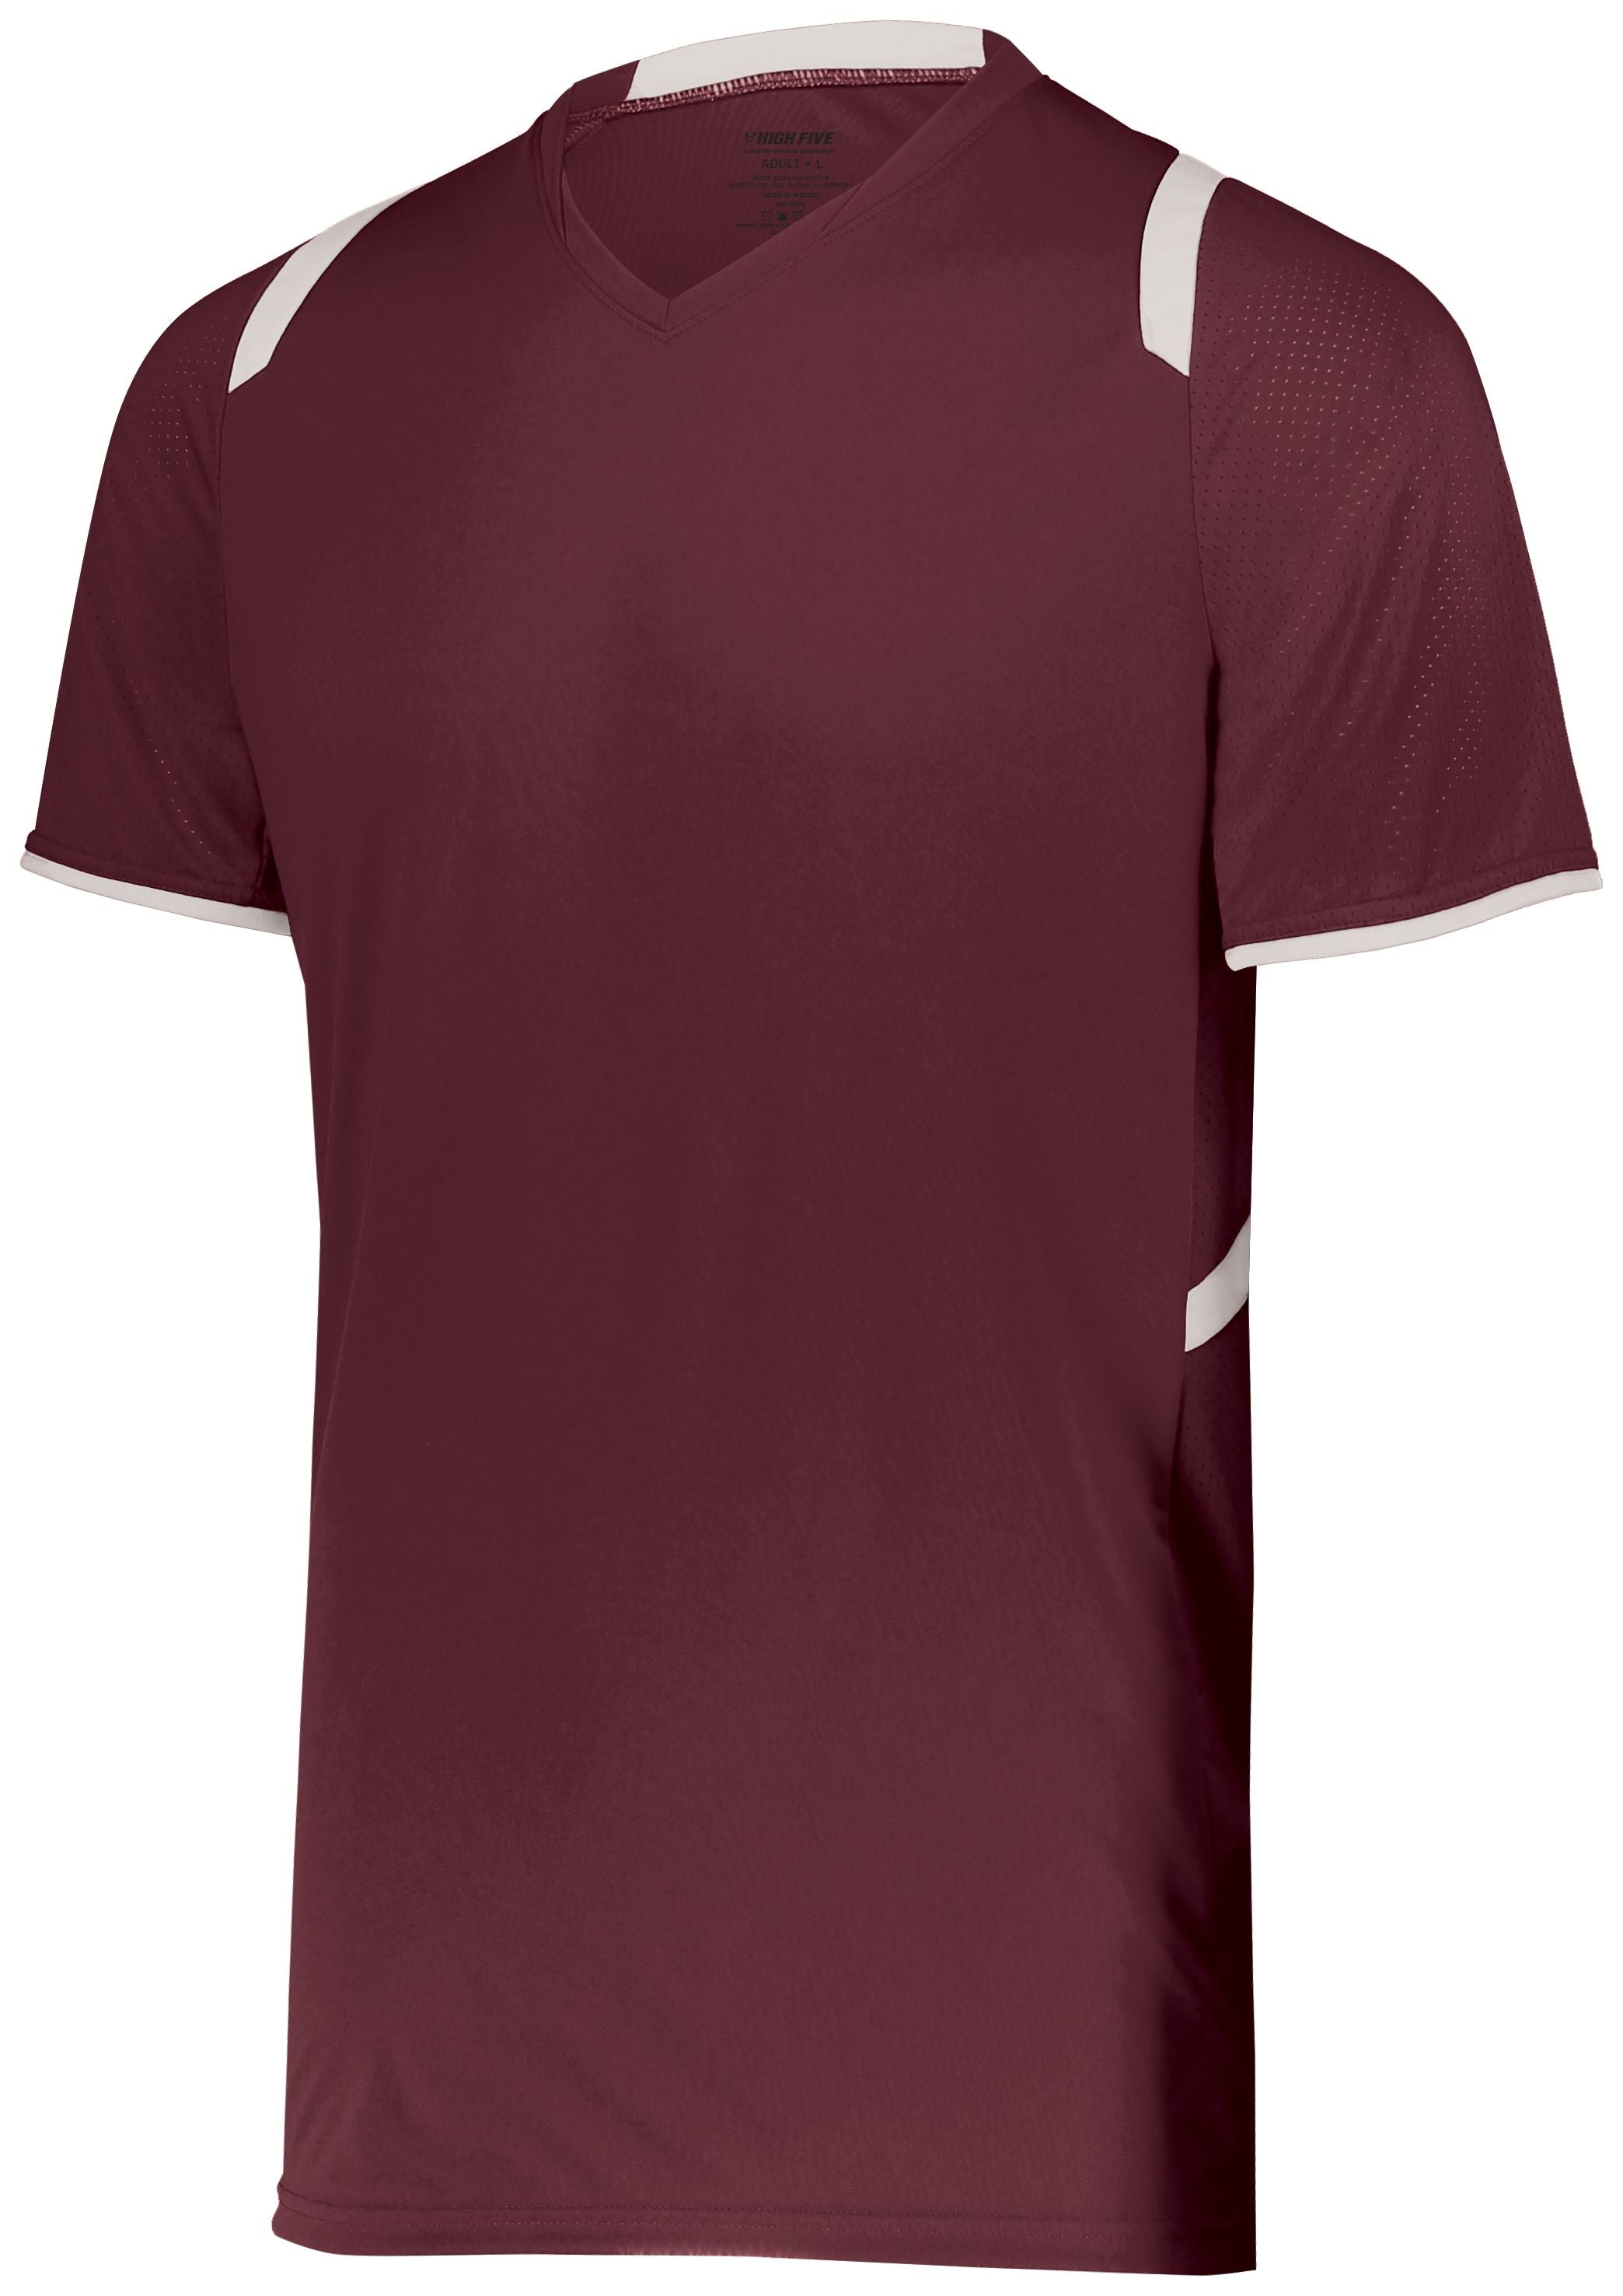 High 5 Youth Millennium Soccer Jersey in Maroon/White  -Part of the Youth, Youth-Jersey, High5-Products, Soccer, Shirts, All-Sports-1 product lines at KanaleyCreations.com